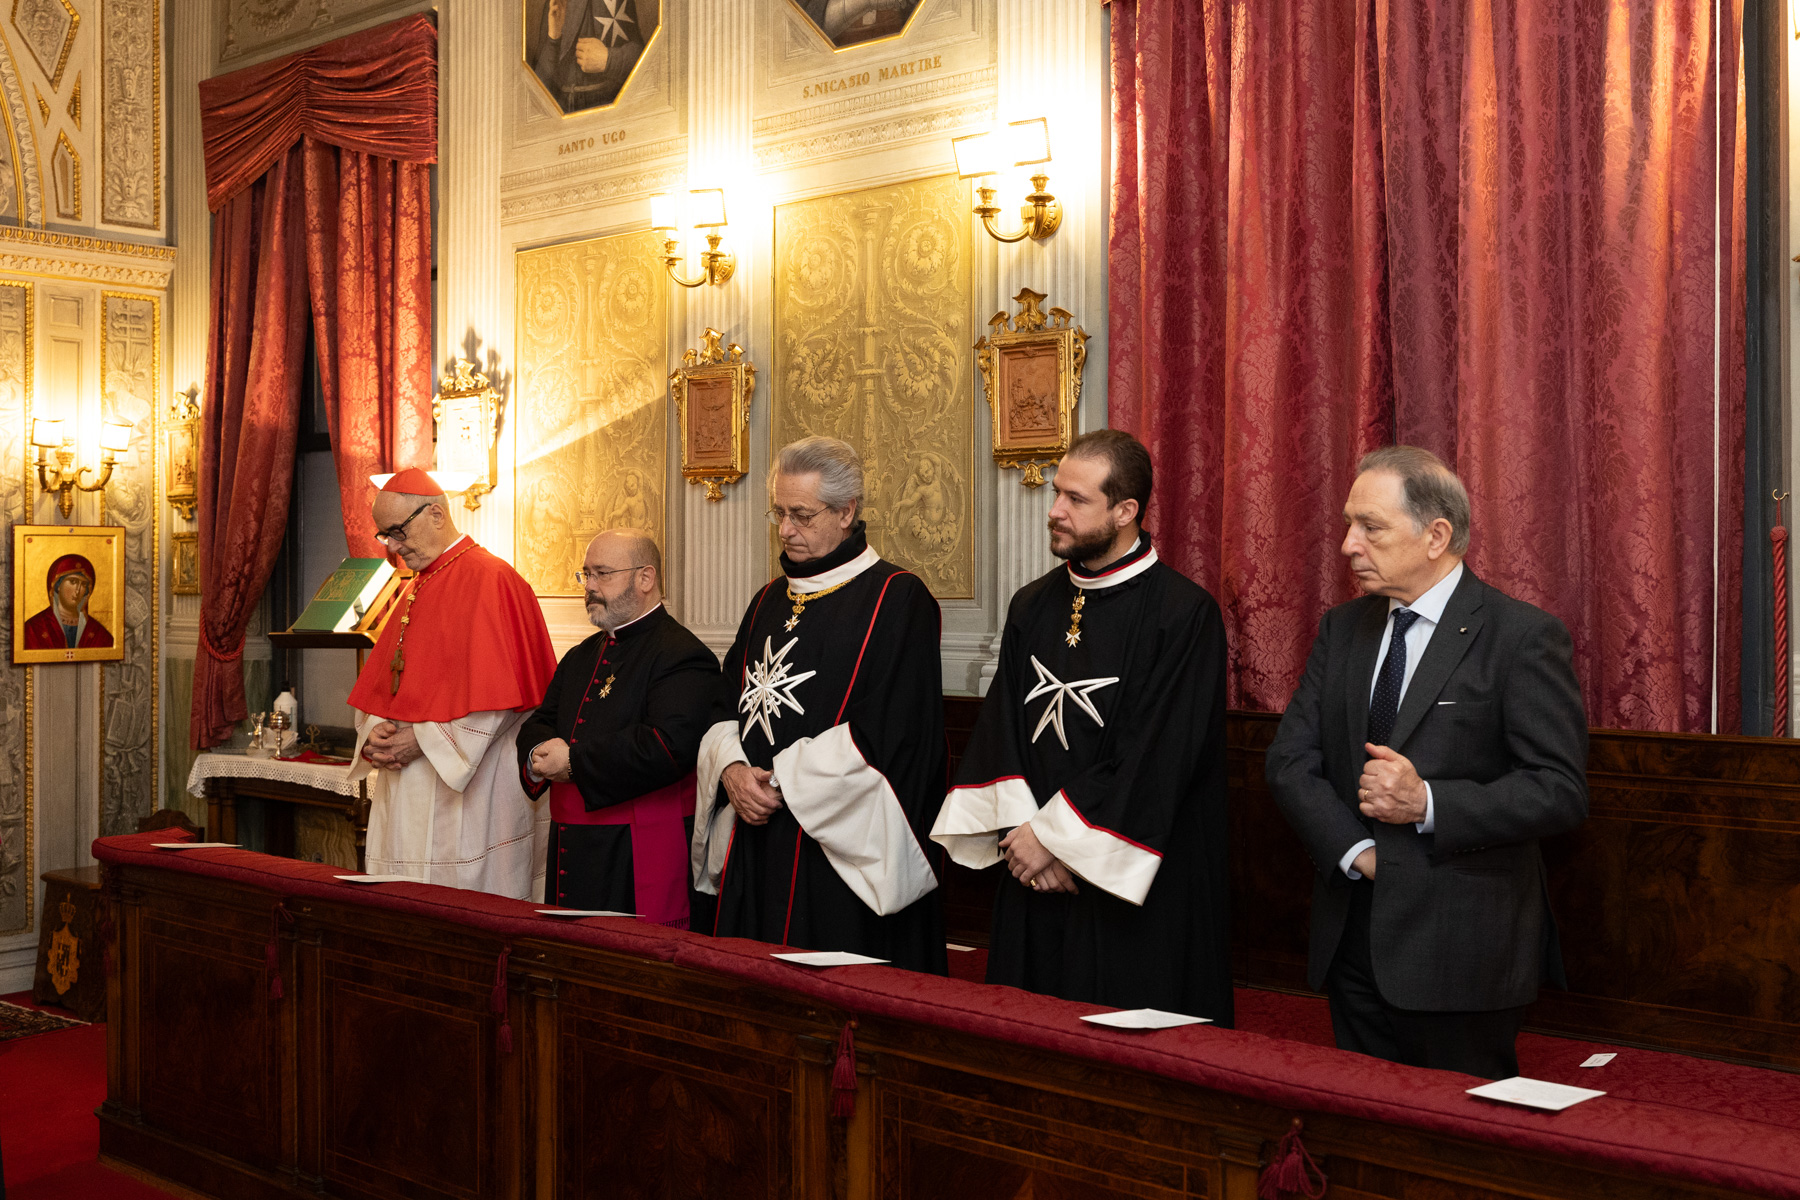 Cardinal Michael Czerny, S.J. Bailiff Grand Cross of Honour and Devotion of the Order of Malta